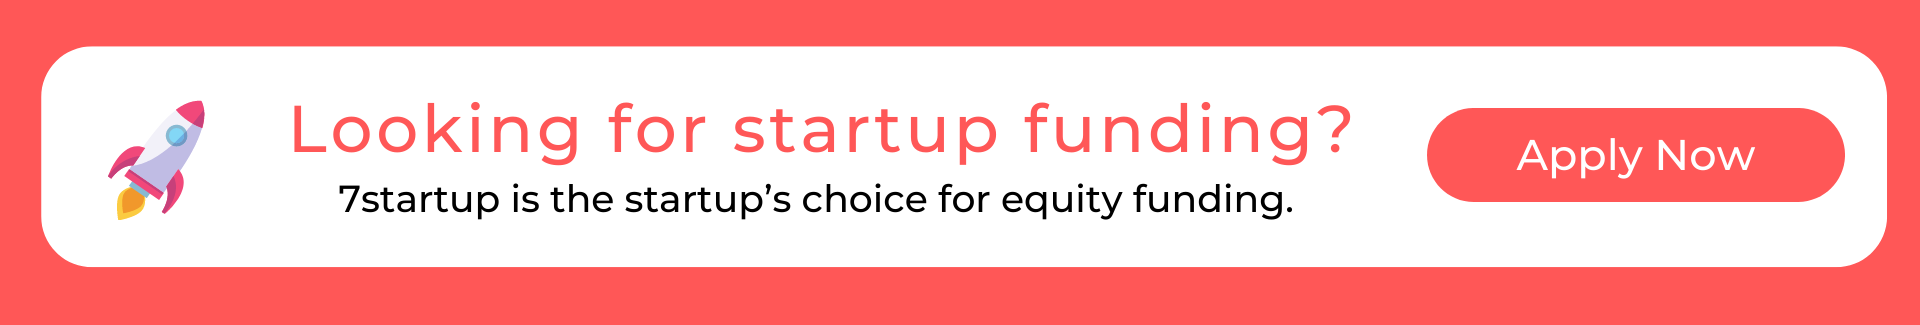 Looking for startup funding?